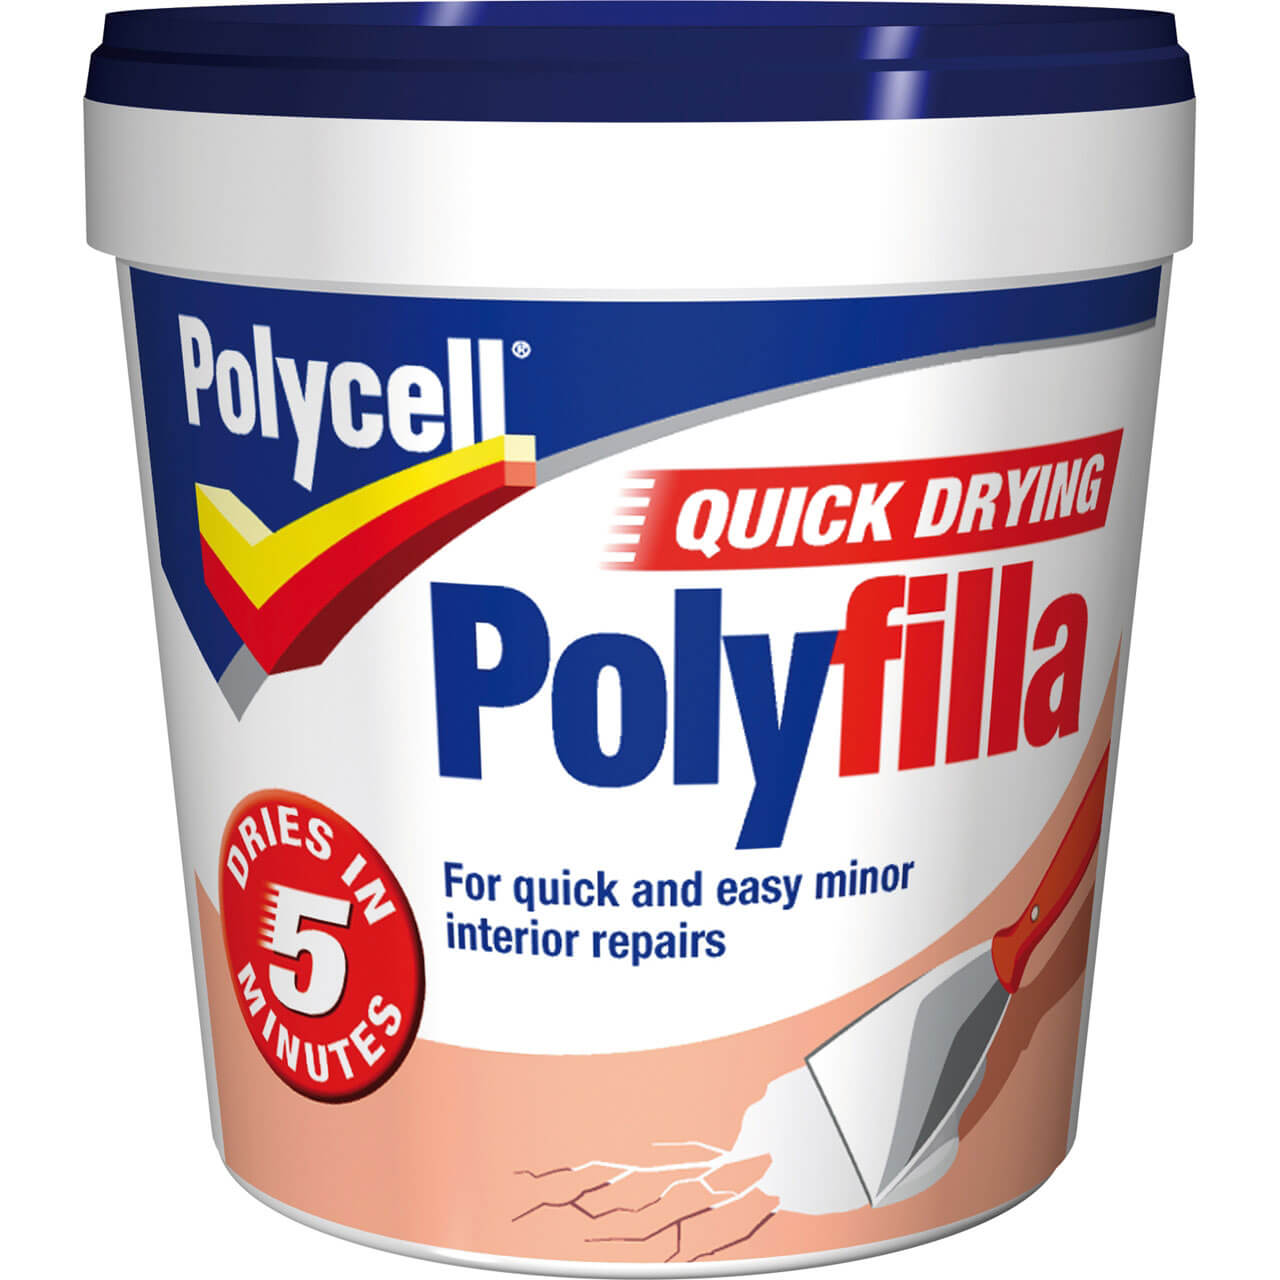 Image of Polycell Multi Purpose Quick Drying Polyfilla Tub 1000g